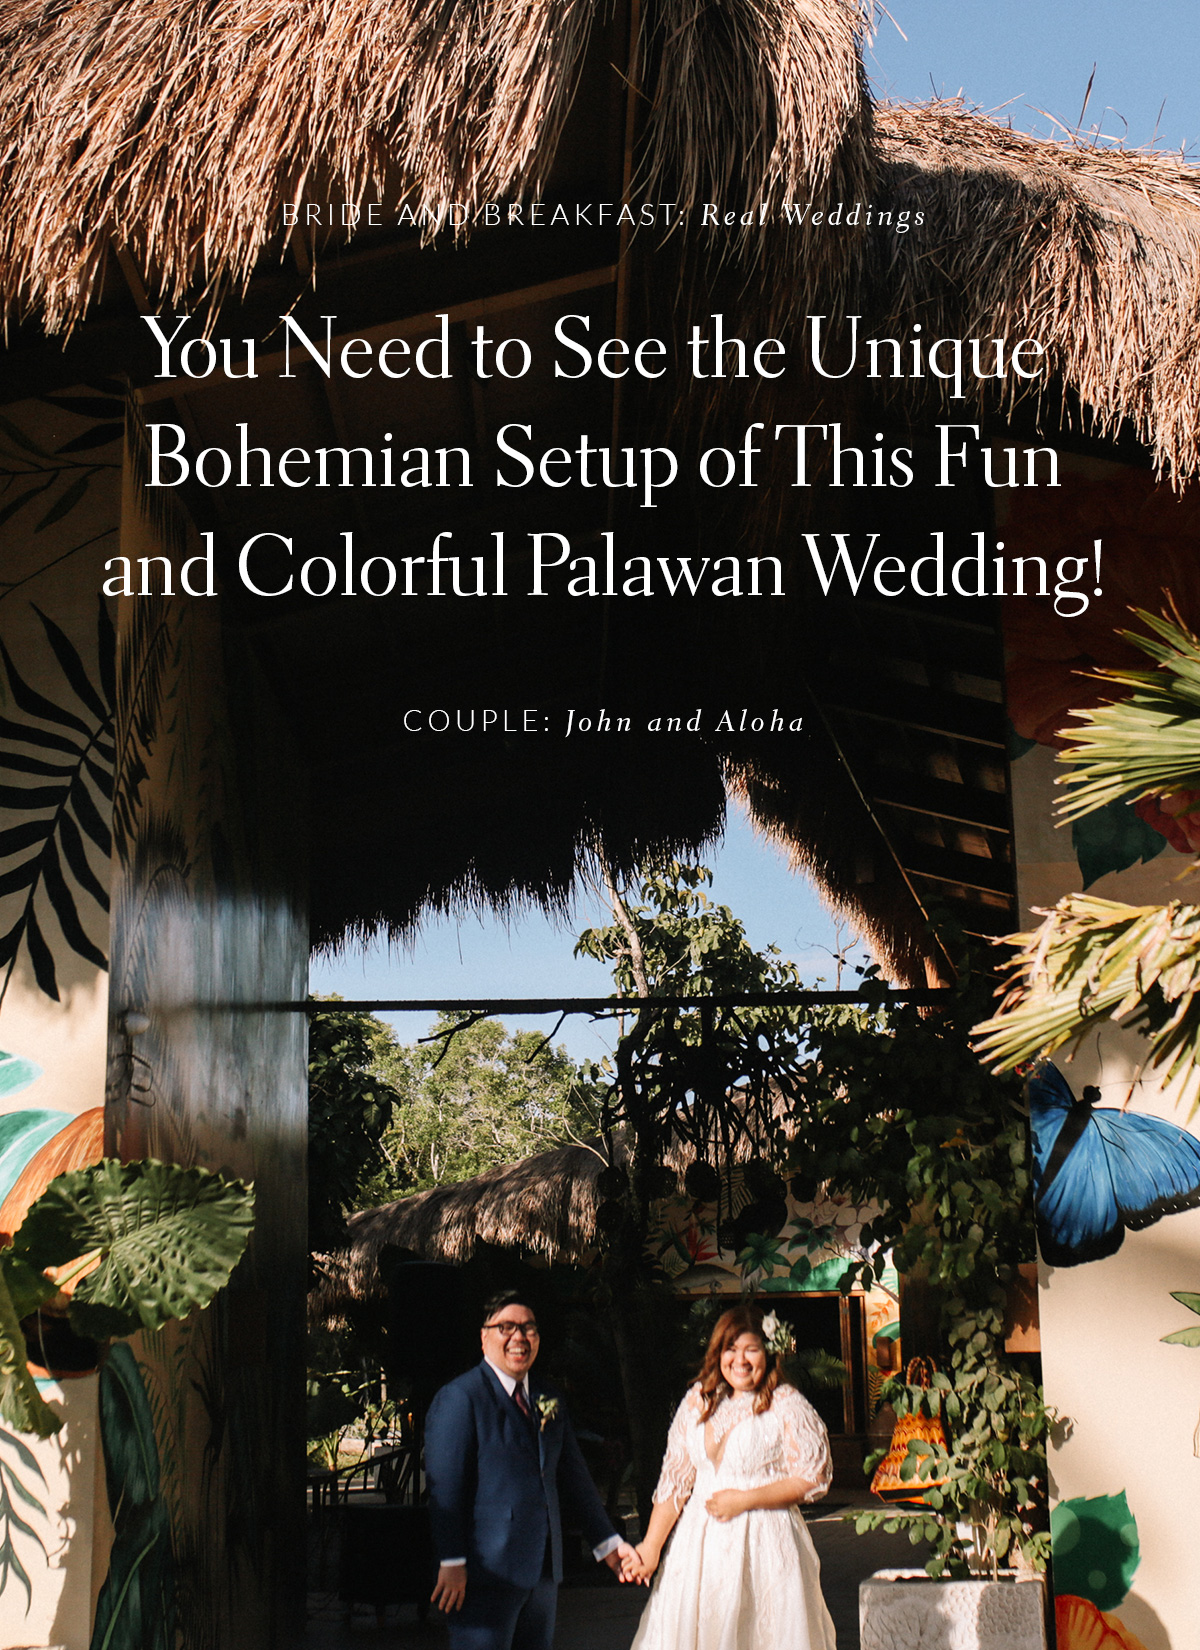 You Need to See the Unique Bohemian Setup of This Fun and Colorful Palawan Wedding!